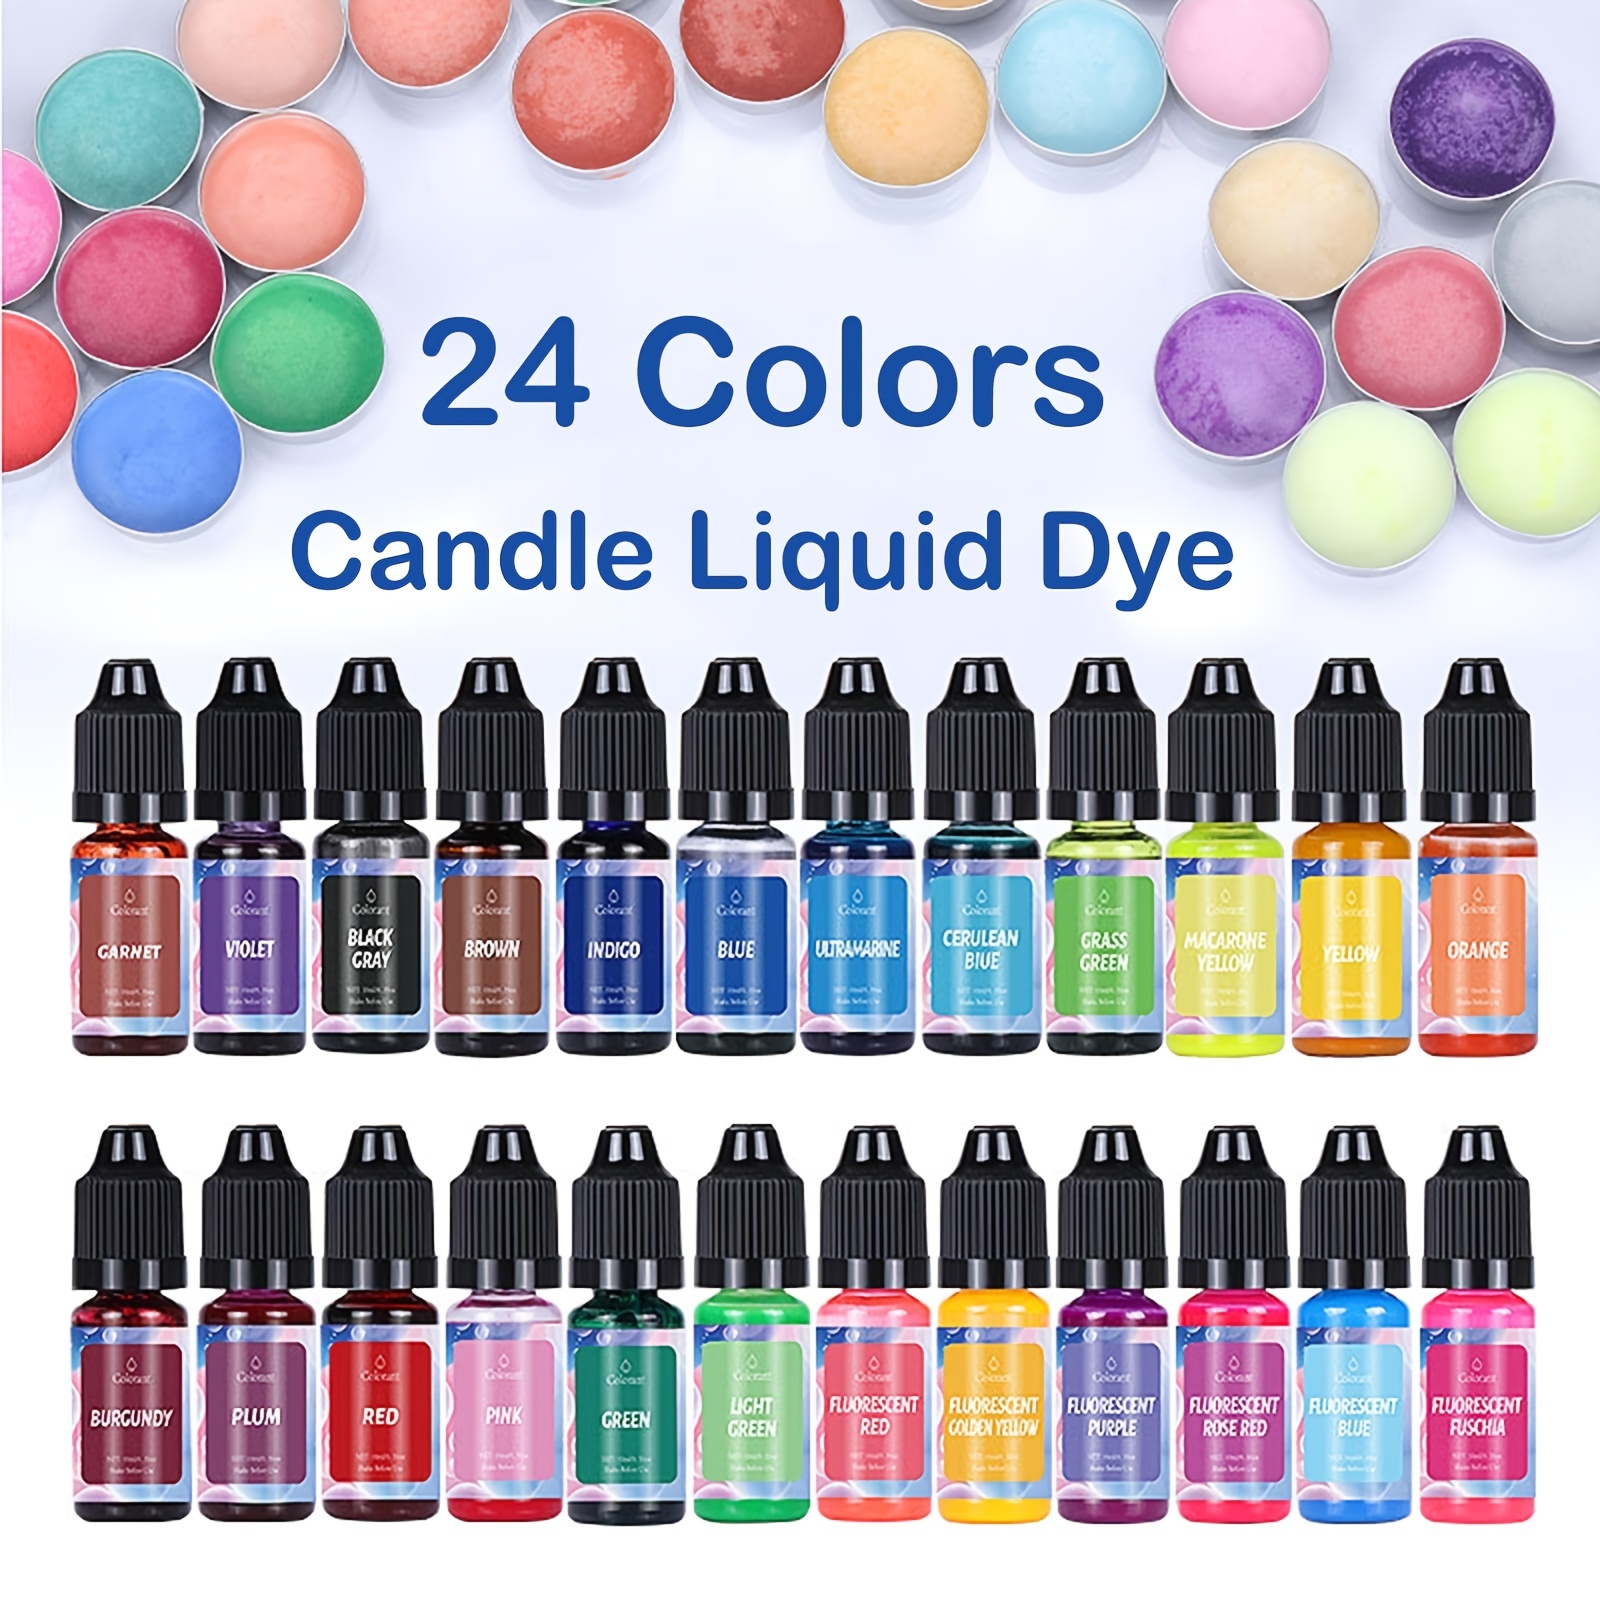 10ml Candle Dye Highly Concentrated Aromatherapy Color Essence Soap Toning  Pigment Soy Wax Paraffin Dye Colorant